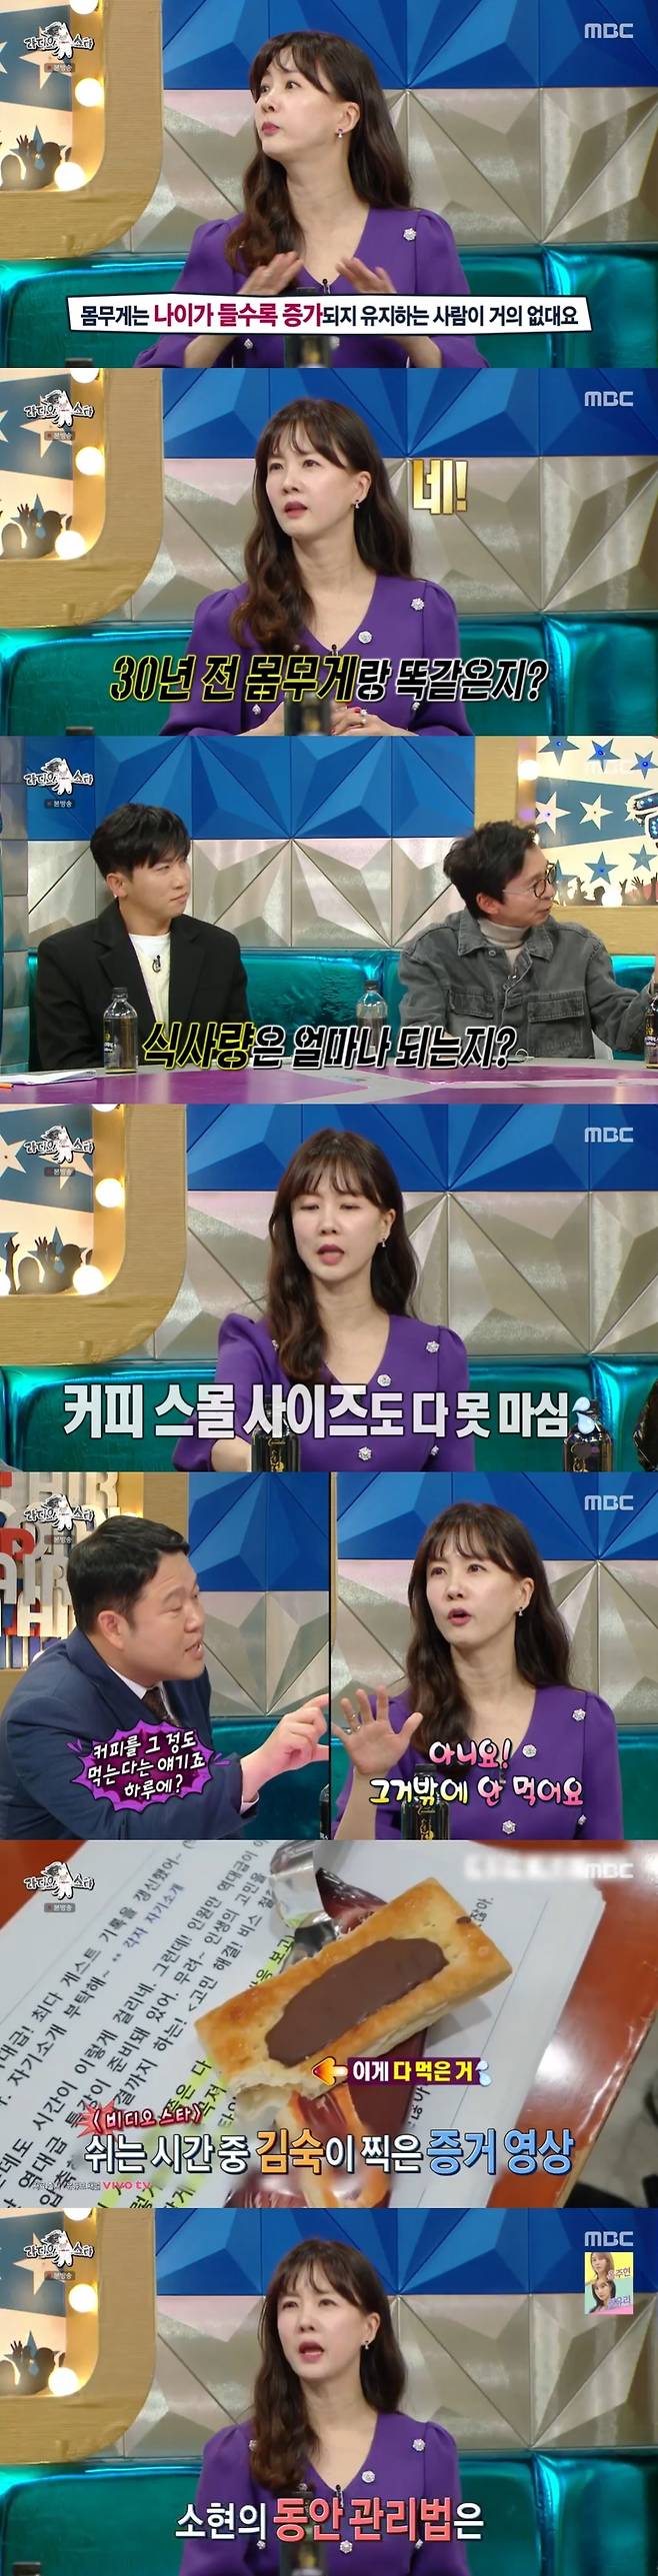 Seoul) = broadcaster Park So-hyun has revealed he has kept his weight the same for 30 years.In MBC entertainment program Radio Star broadcasted on the last day, Park So-hyun came out as a guest and said, Many people are curious about my health secret.He said, How do you manage your body uniformly?Park So-hyun said, I stretch before I sleep at Moy Yat night; I always do it when I travel; no matter how tired I am, I fold my body like a folder.The gag woman Hong Hyon-hee, who was next to him, said, The weight is 47kg, not always the same, Waist is 25.Park So-hyun is right, saying, Normally, the weight increases as you get older, and there are few people who keep it.But I weighed the same as 30 years ago. Im only about 1kg different from 30 years ago, he said. When I ate a little more rice, I went up as much as I ate.I can not say the pleasure when I increased 500g. When MCs wondered about the amount of food, Park So-hyun said he was always newsing, especially Coffee can not drink small sizes.I have never eaten coffee, he said. I eat that much for breakfast, lunch, I eat a cup of coffee, and I do not eat anything else. Everyone says, Can you live like this? But there is energy in the news, Park So-hyun said.Kim Gook Jin, who listened to this, laughed and laughed.On the show, Park So-hyun also revealed his secrets during the show.He said, Moy Yat stretching before bed, Moy Yat drinking herbal tea, not turning on heaters or air conditioners to avoid dryness, and putting wet tissue on radio booths.